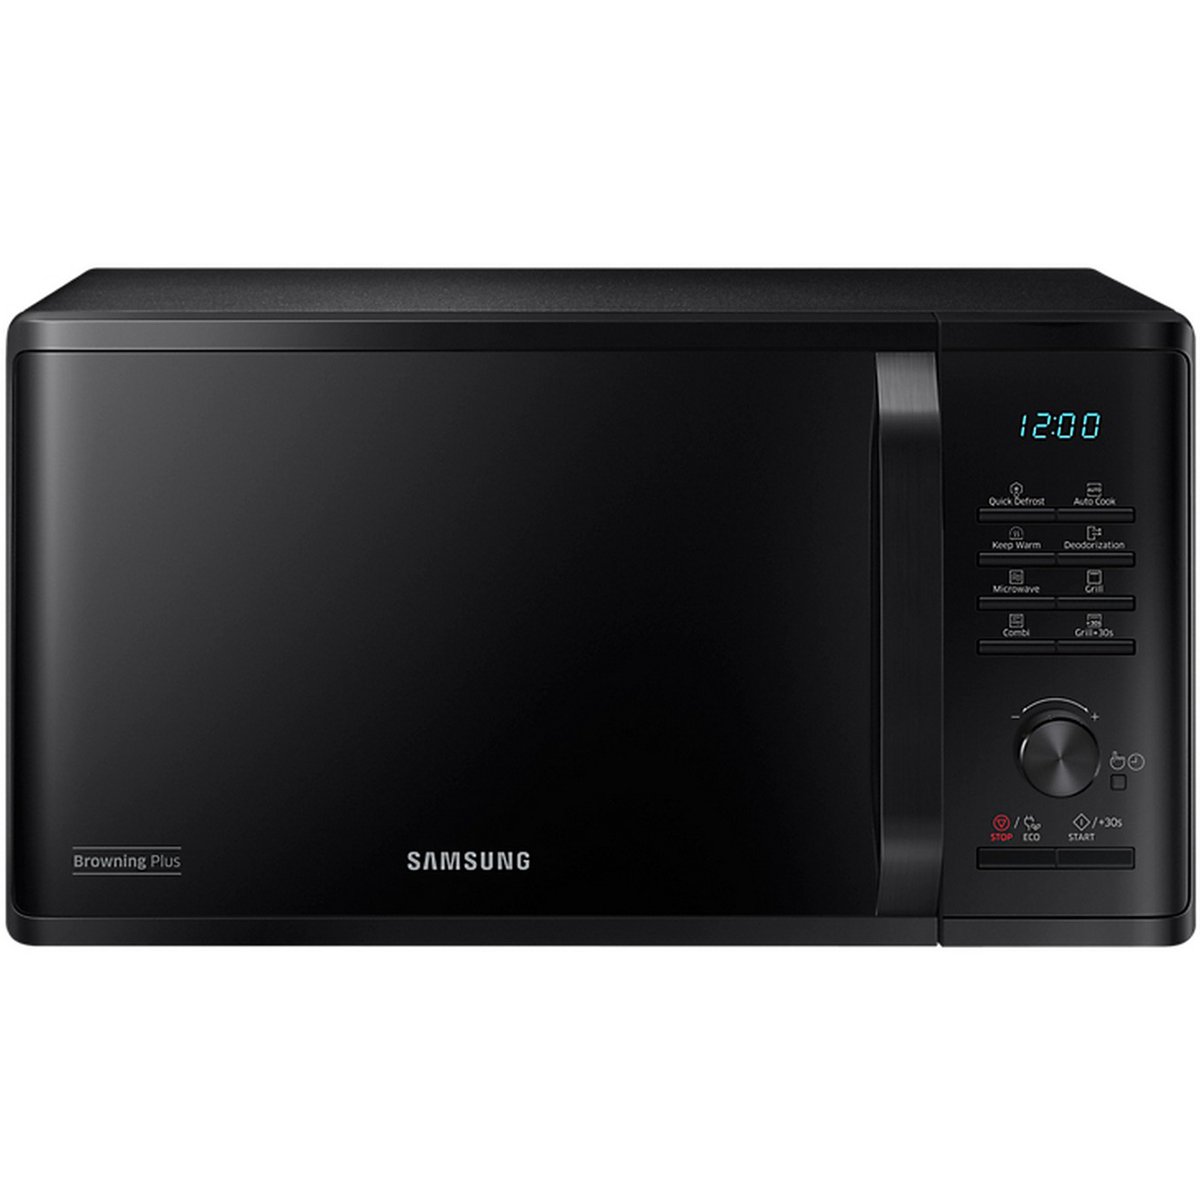 Buy Samsung Microwave Oven MG23K3515AK 23Ltr Online at Best Price | Microwave Ovens | Lulu Kuwait in Kuwait